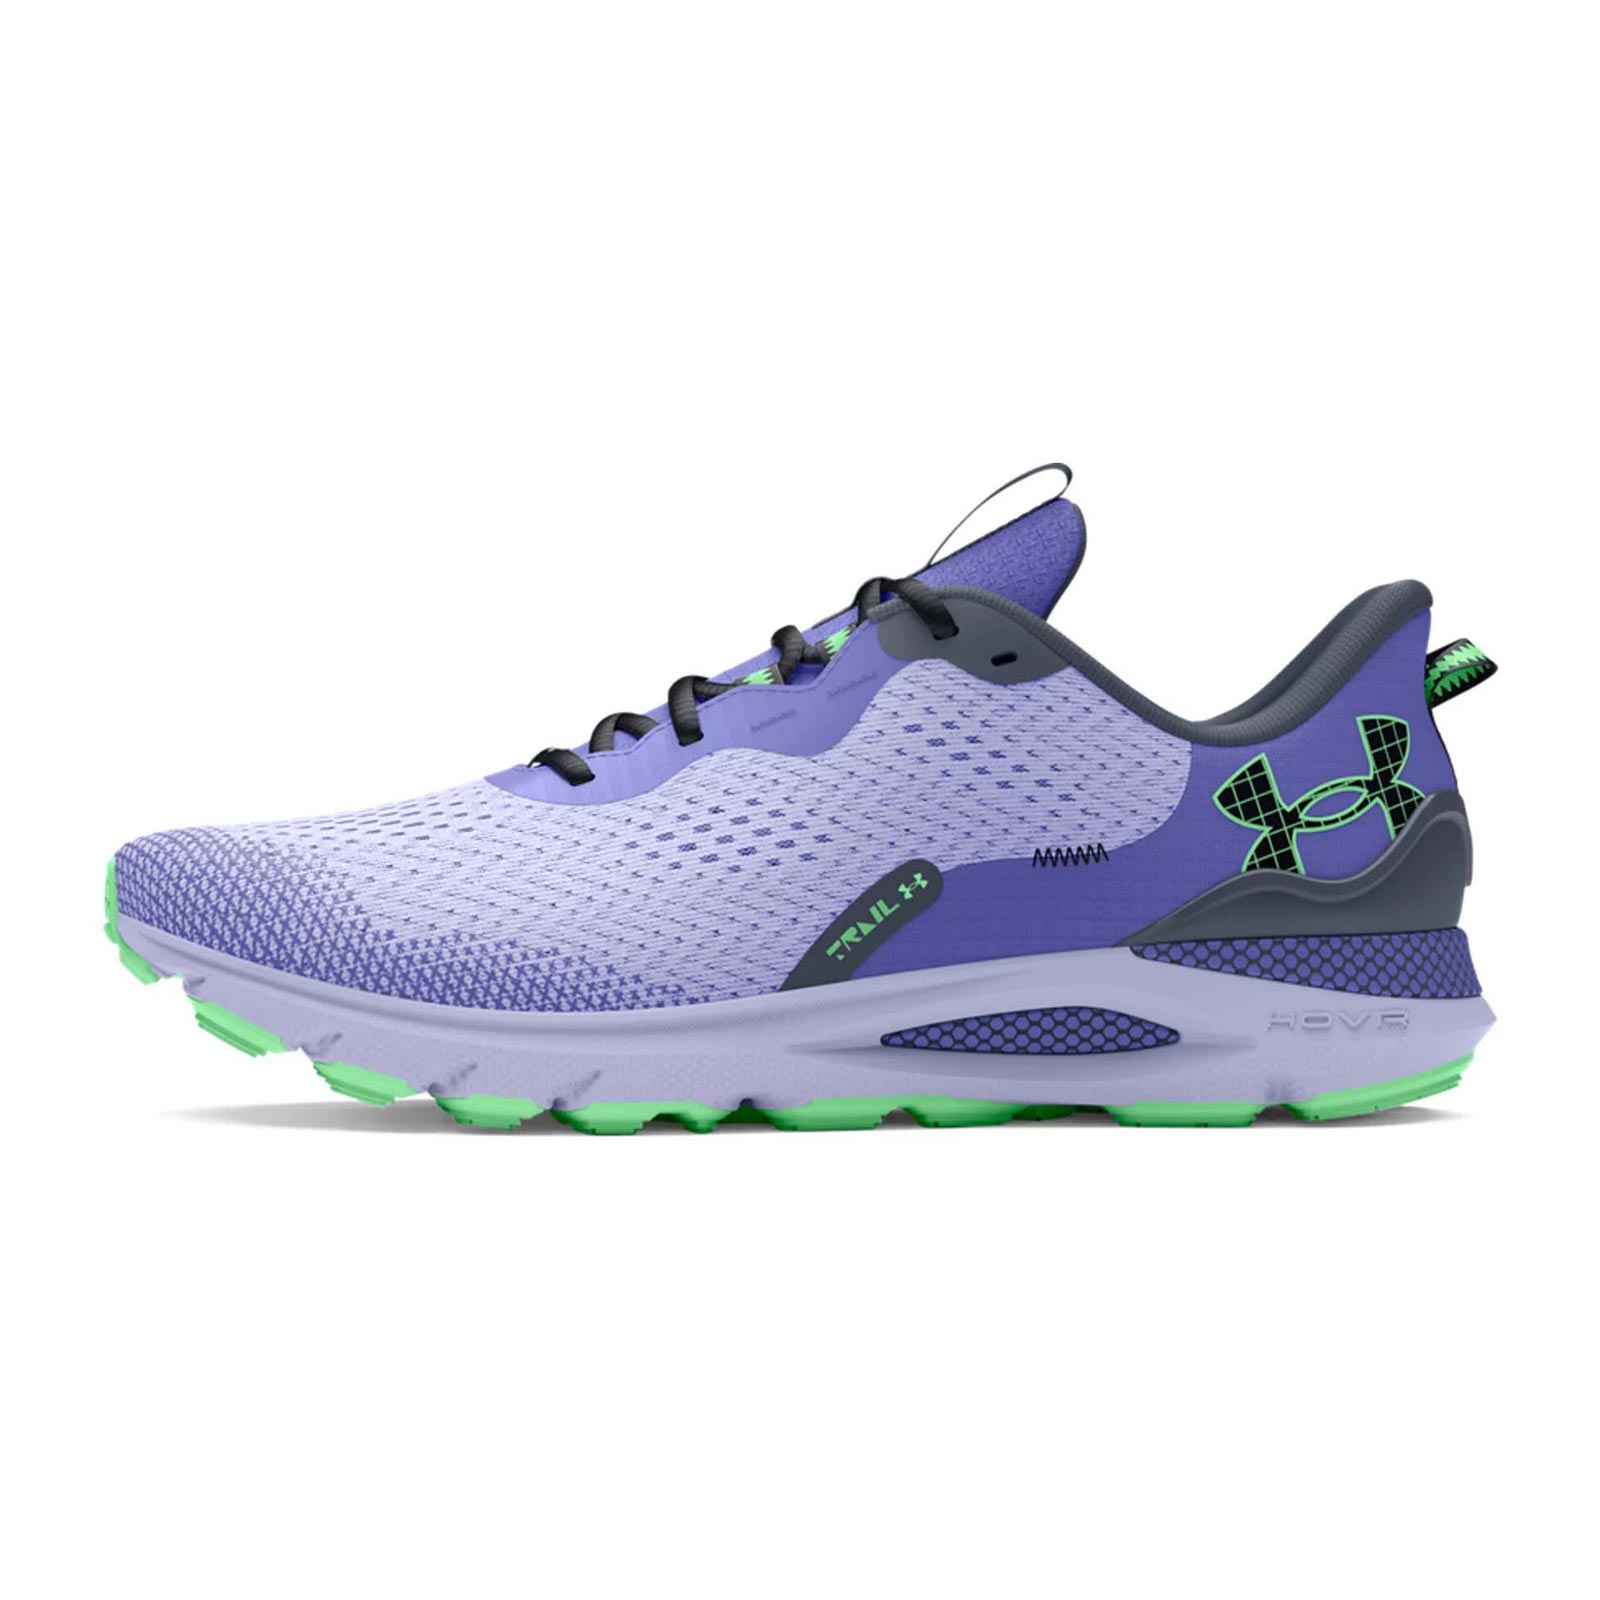 UNDER ARMOUR U SONIC WOMENS TRAIL RUNNING SHOES